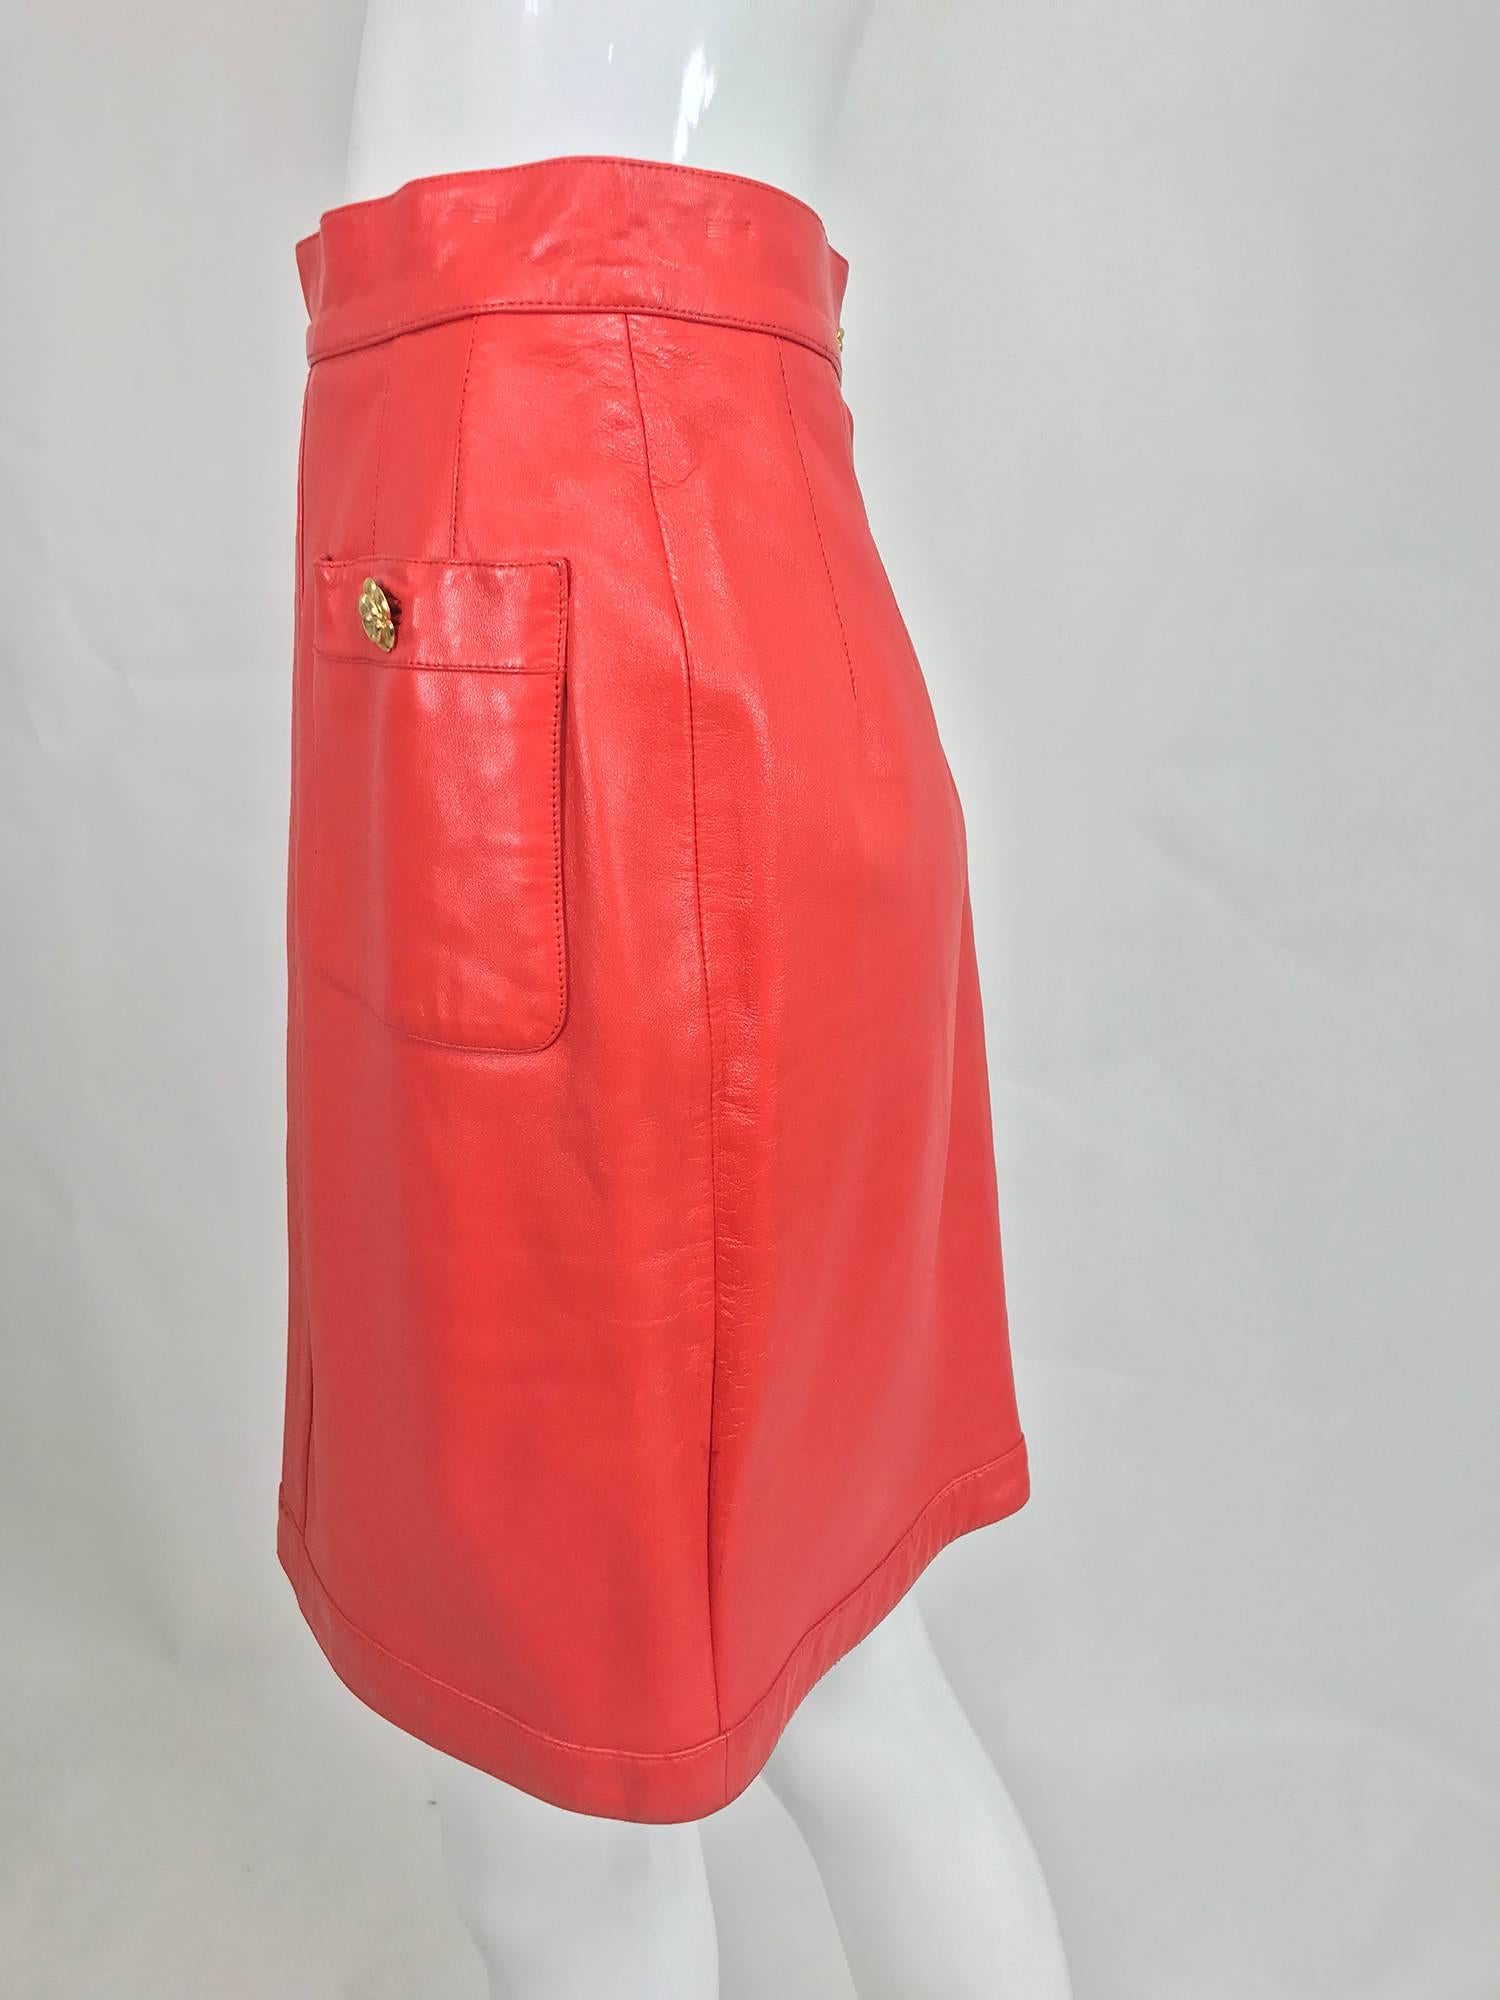 Chanel Vintage 1990s coral red leather skirt with pockets 2